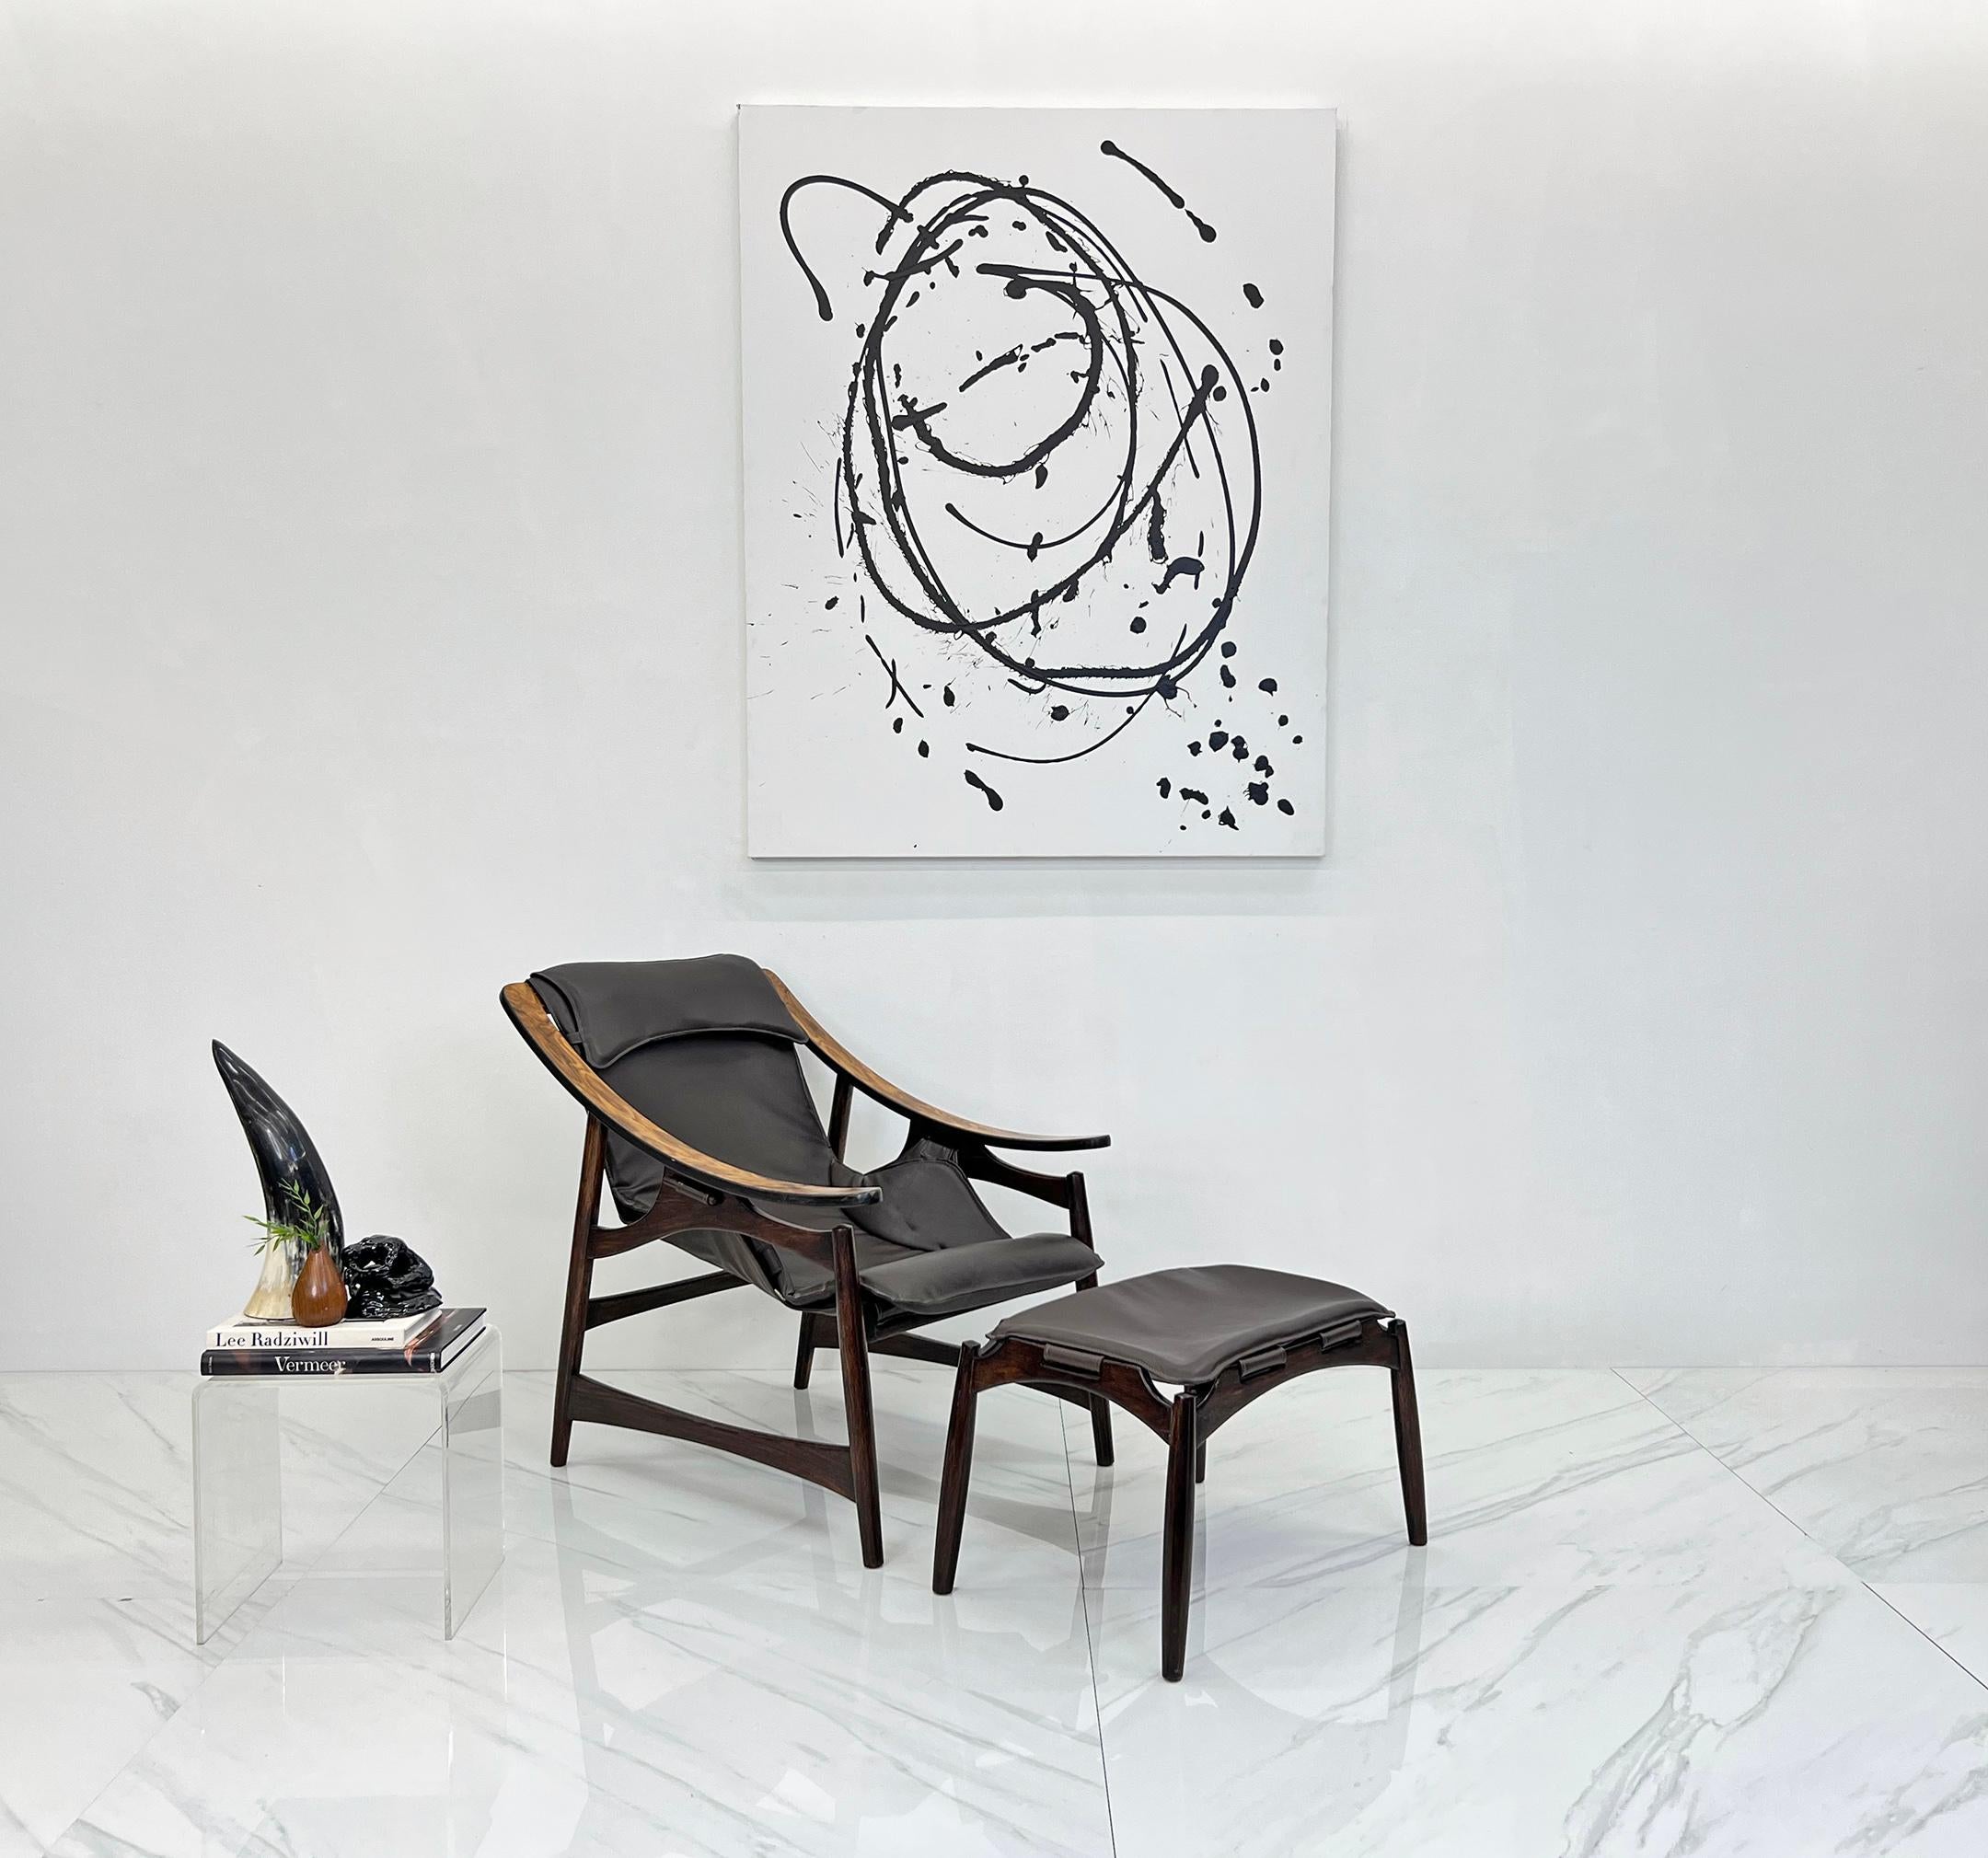 This Groovy Rosewood Sling Chair by Liceu de Artes e Ofícios is a true Brazilian Mid Century Modern Gem.

Picture yourself lounging like a boss in the coolest chair straight from the '60s – the Rosewood Sling Chair by the groovy folks at Liceu de